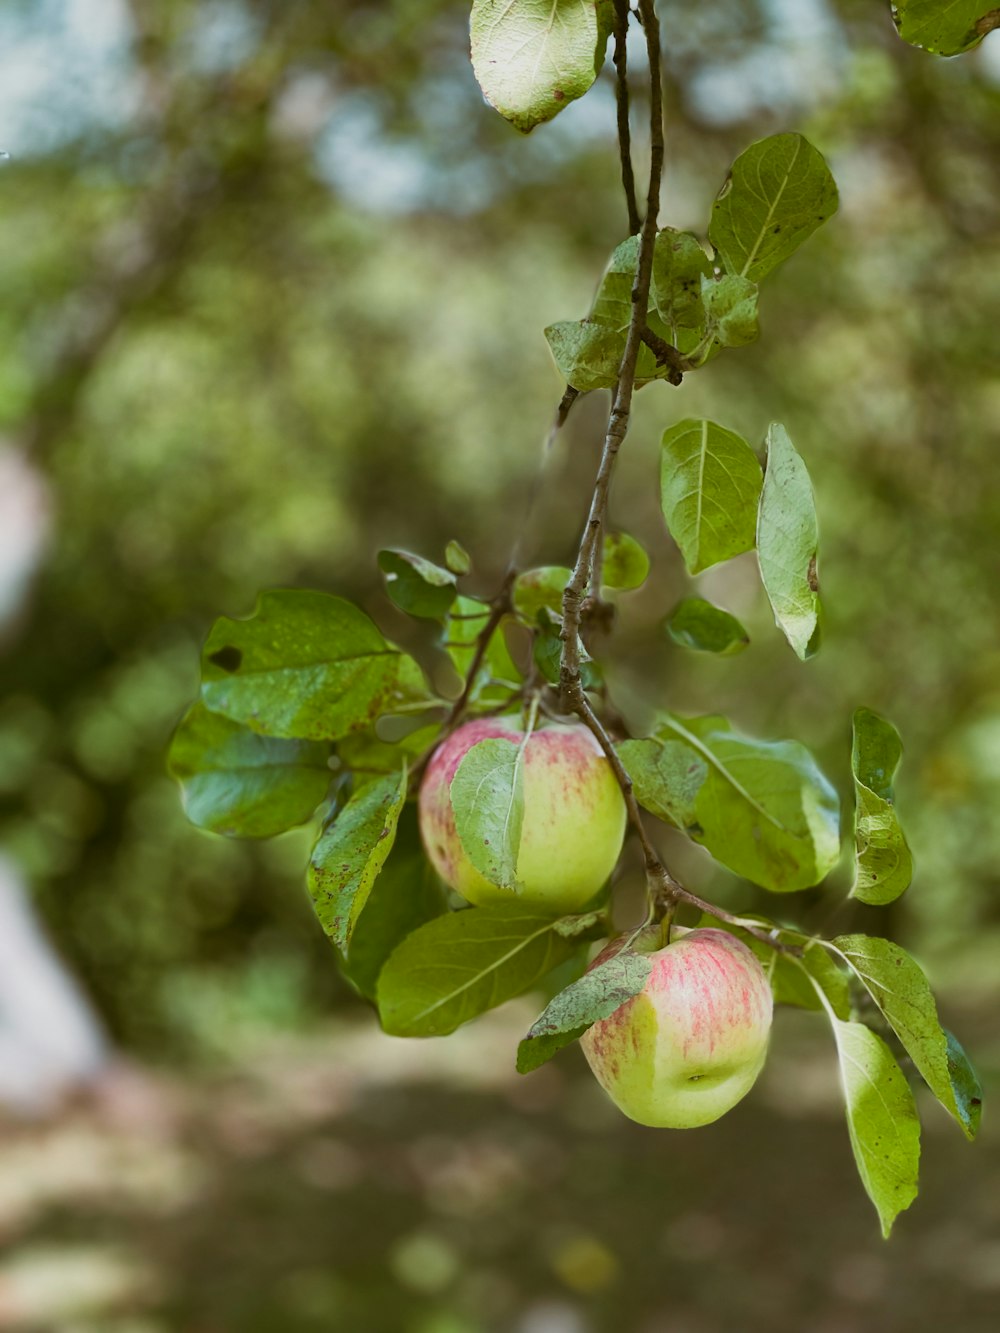 a close-up of some apples